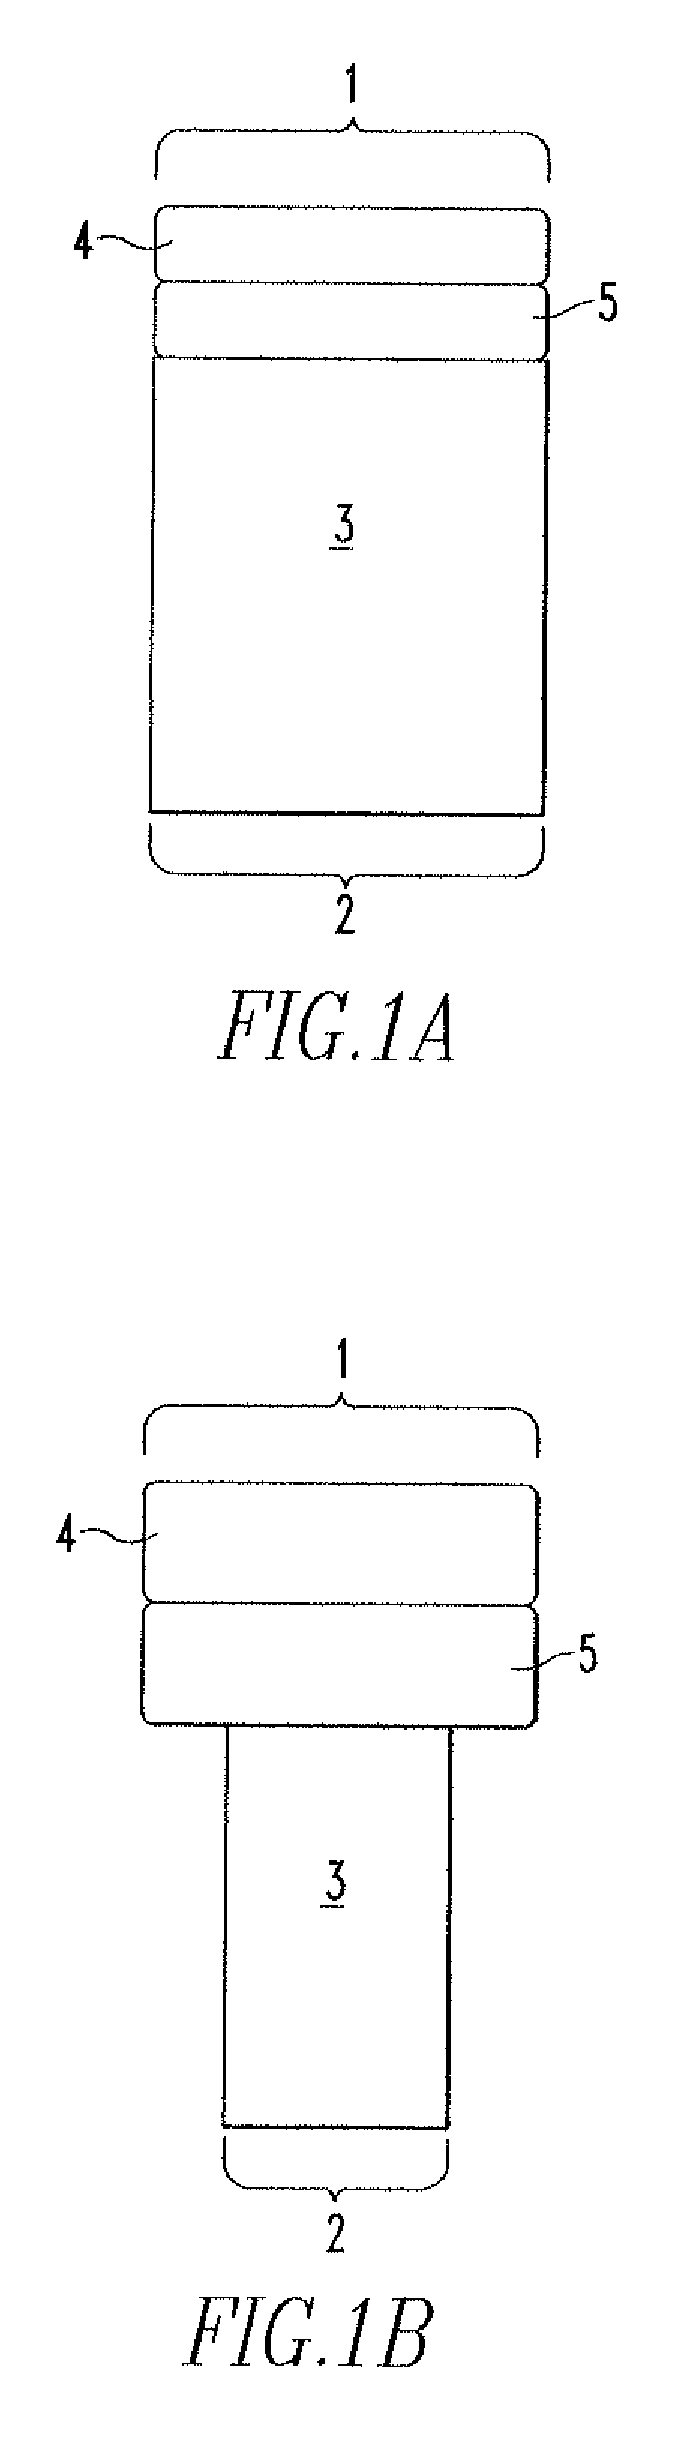 Implant Scaffold Combined With Autologous Tissue, Allogenic Tissue, Cultured Tissue, or combinations Thereof